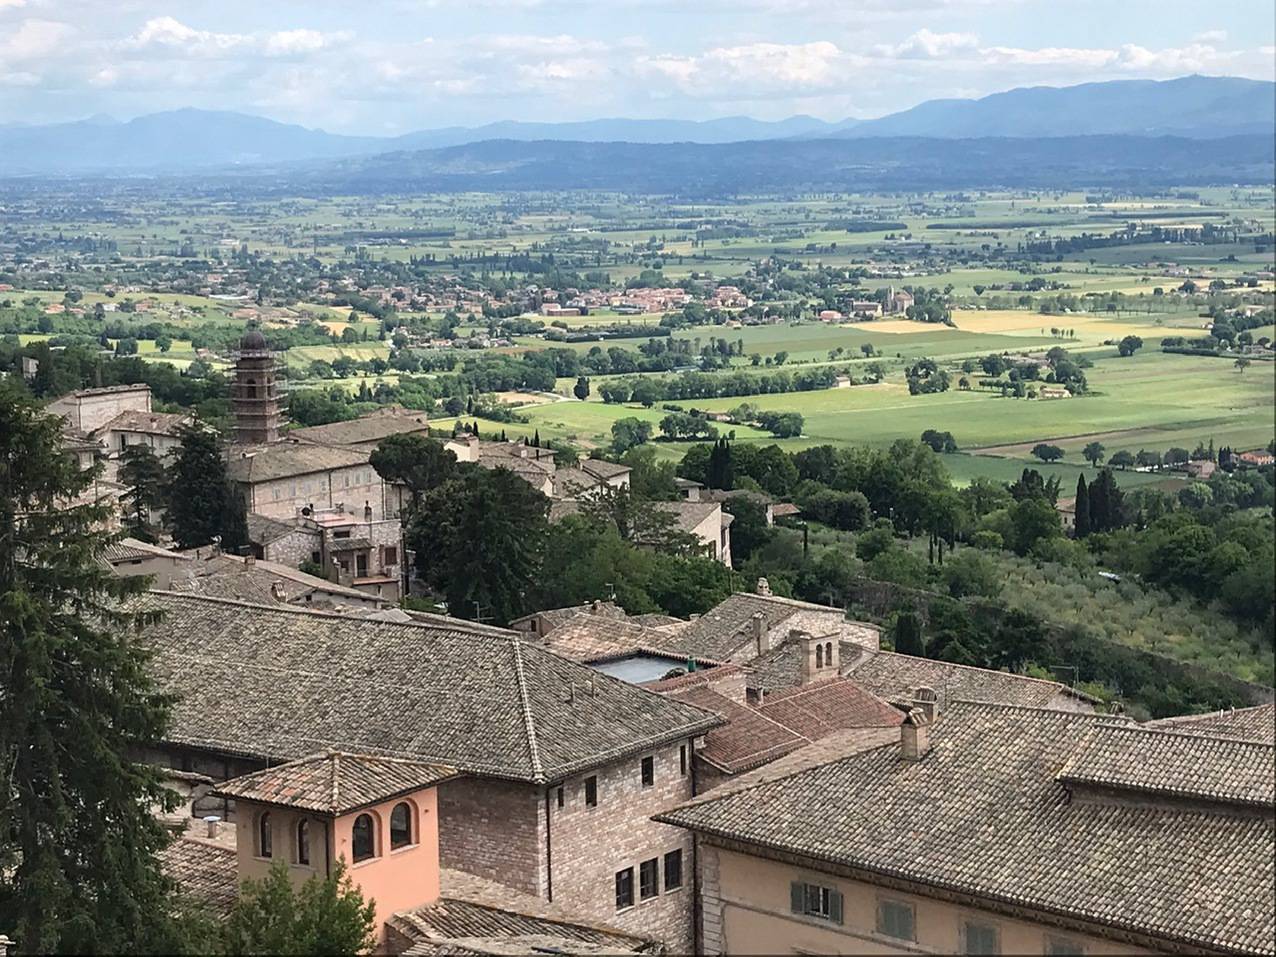 The Basilica at Assisi, Day 5 highlights of clergy pilgrimage